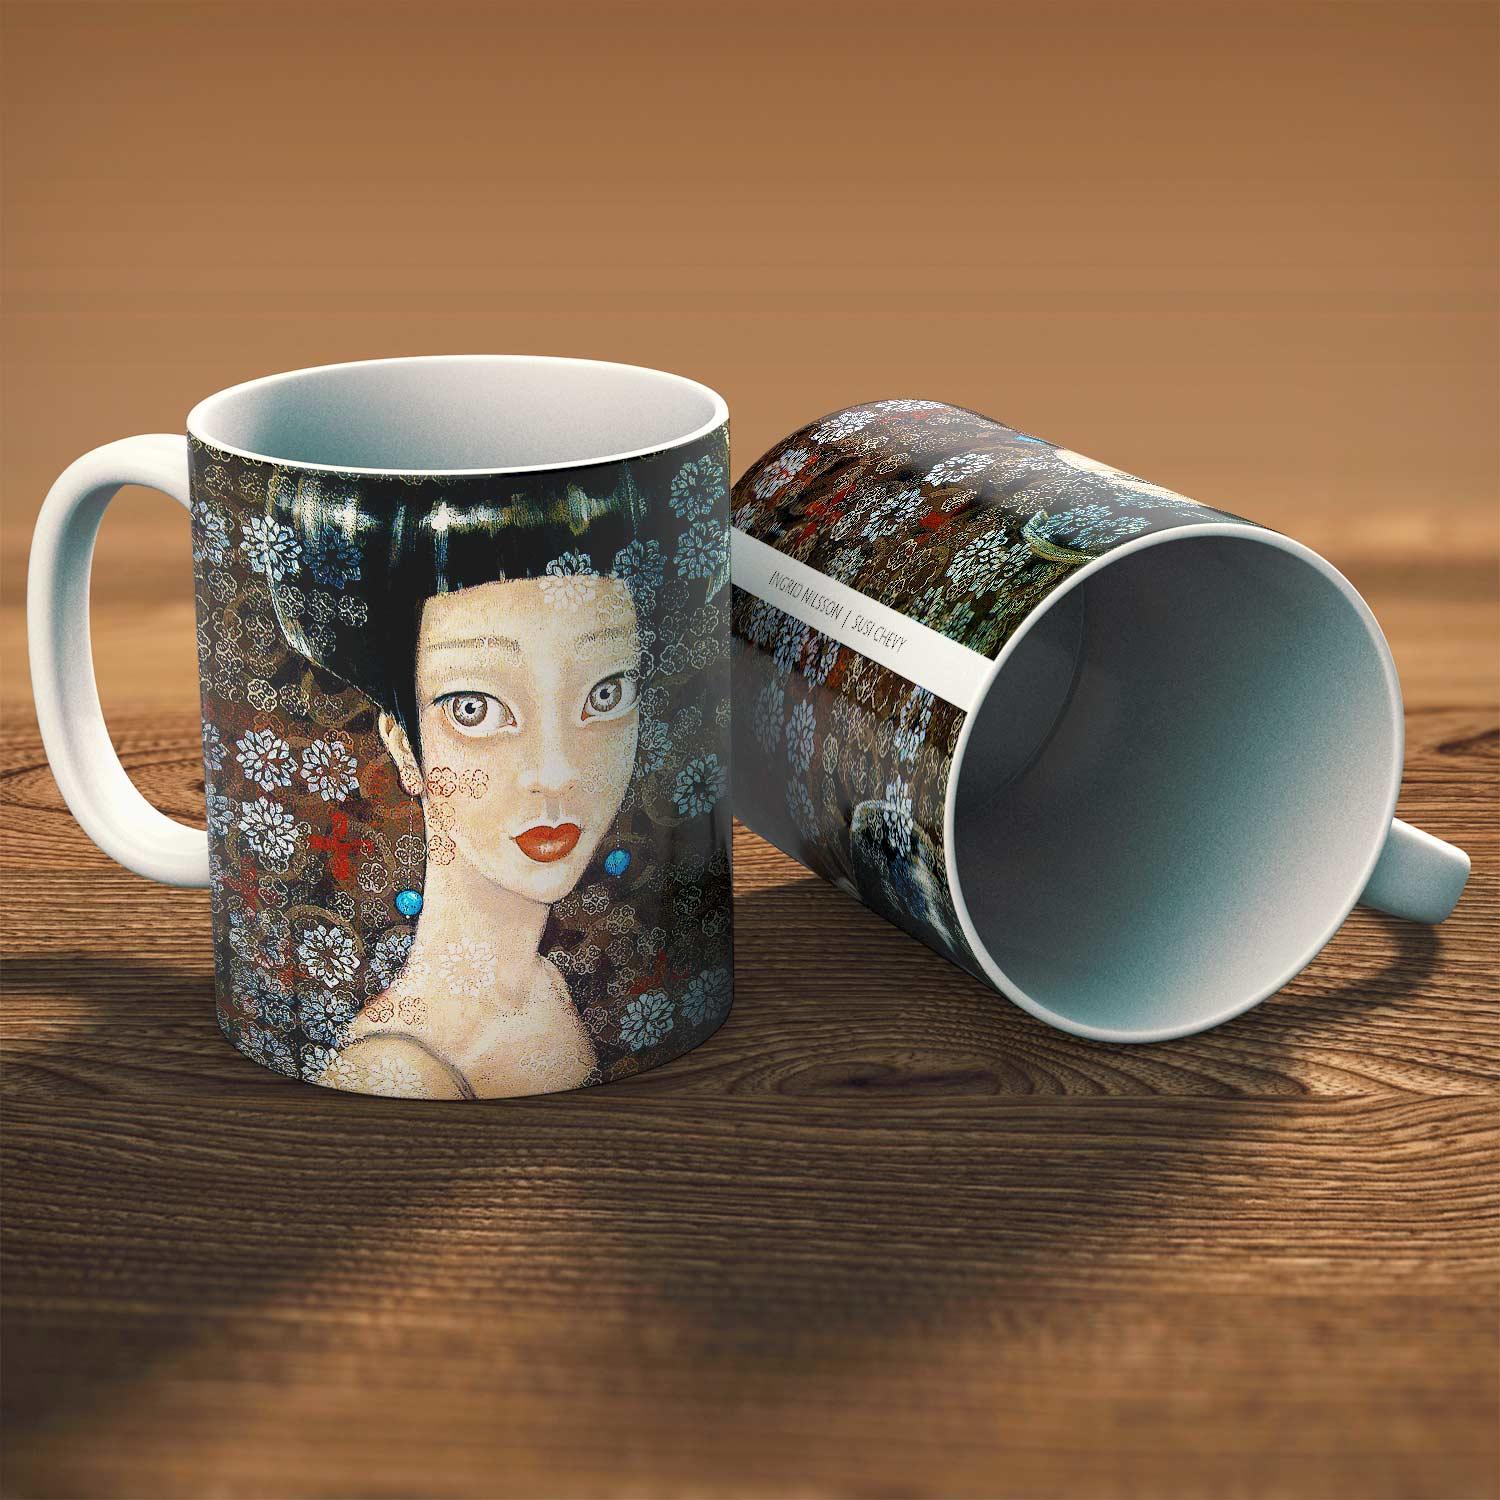 Susi Chevy Mug from an original painting by artist Ingrid Nilsson